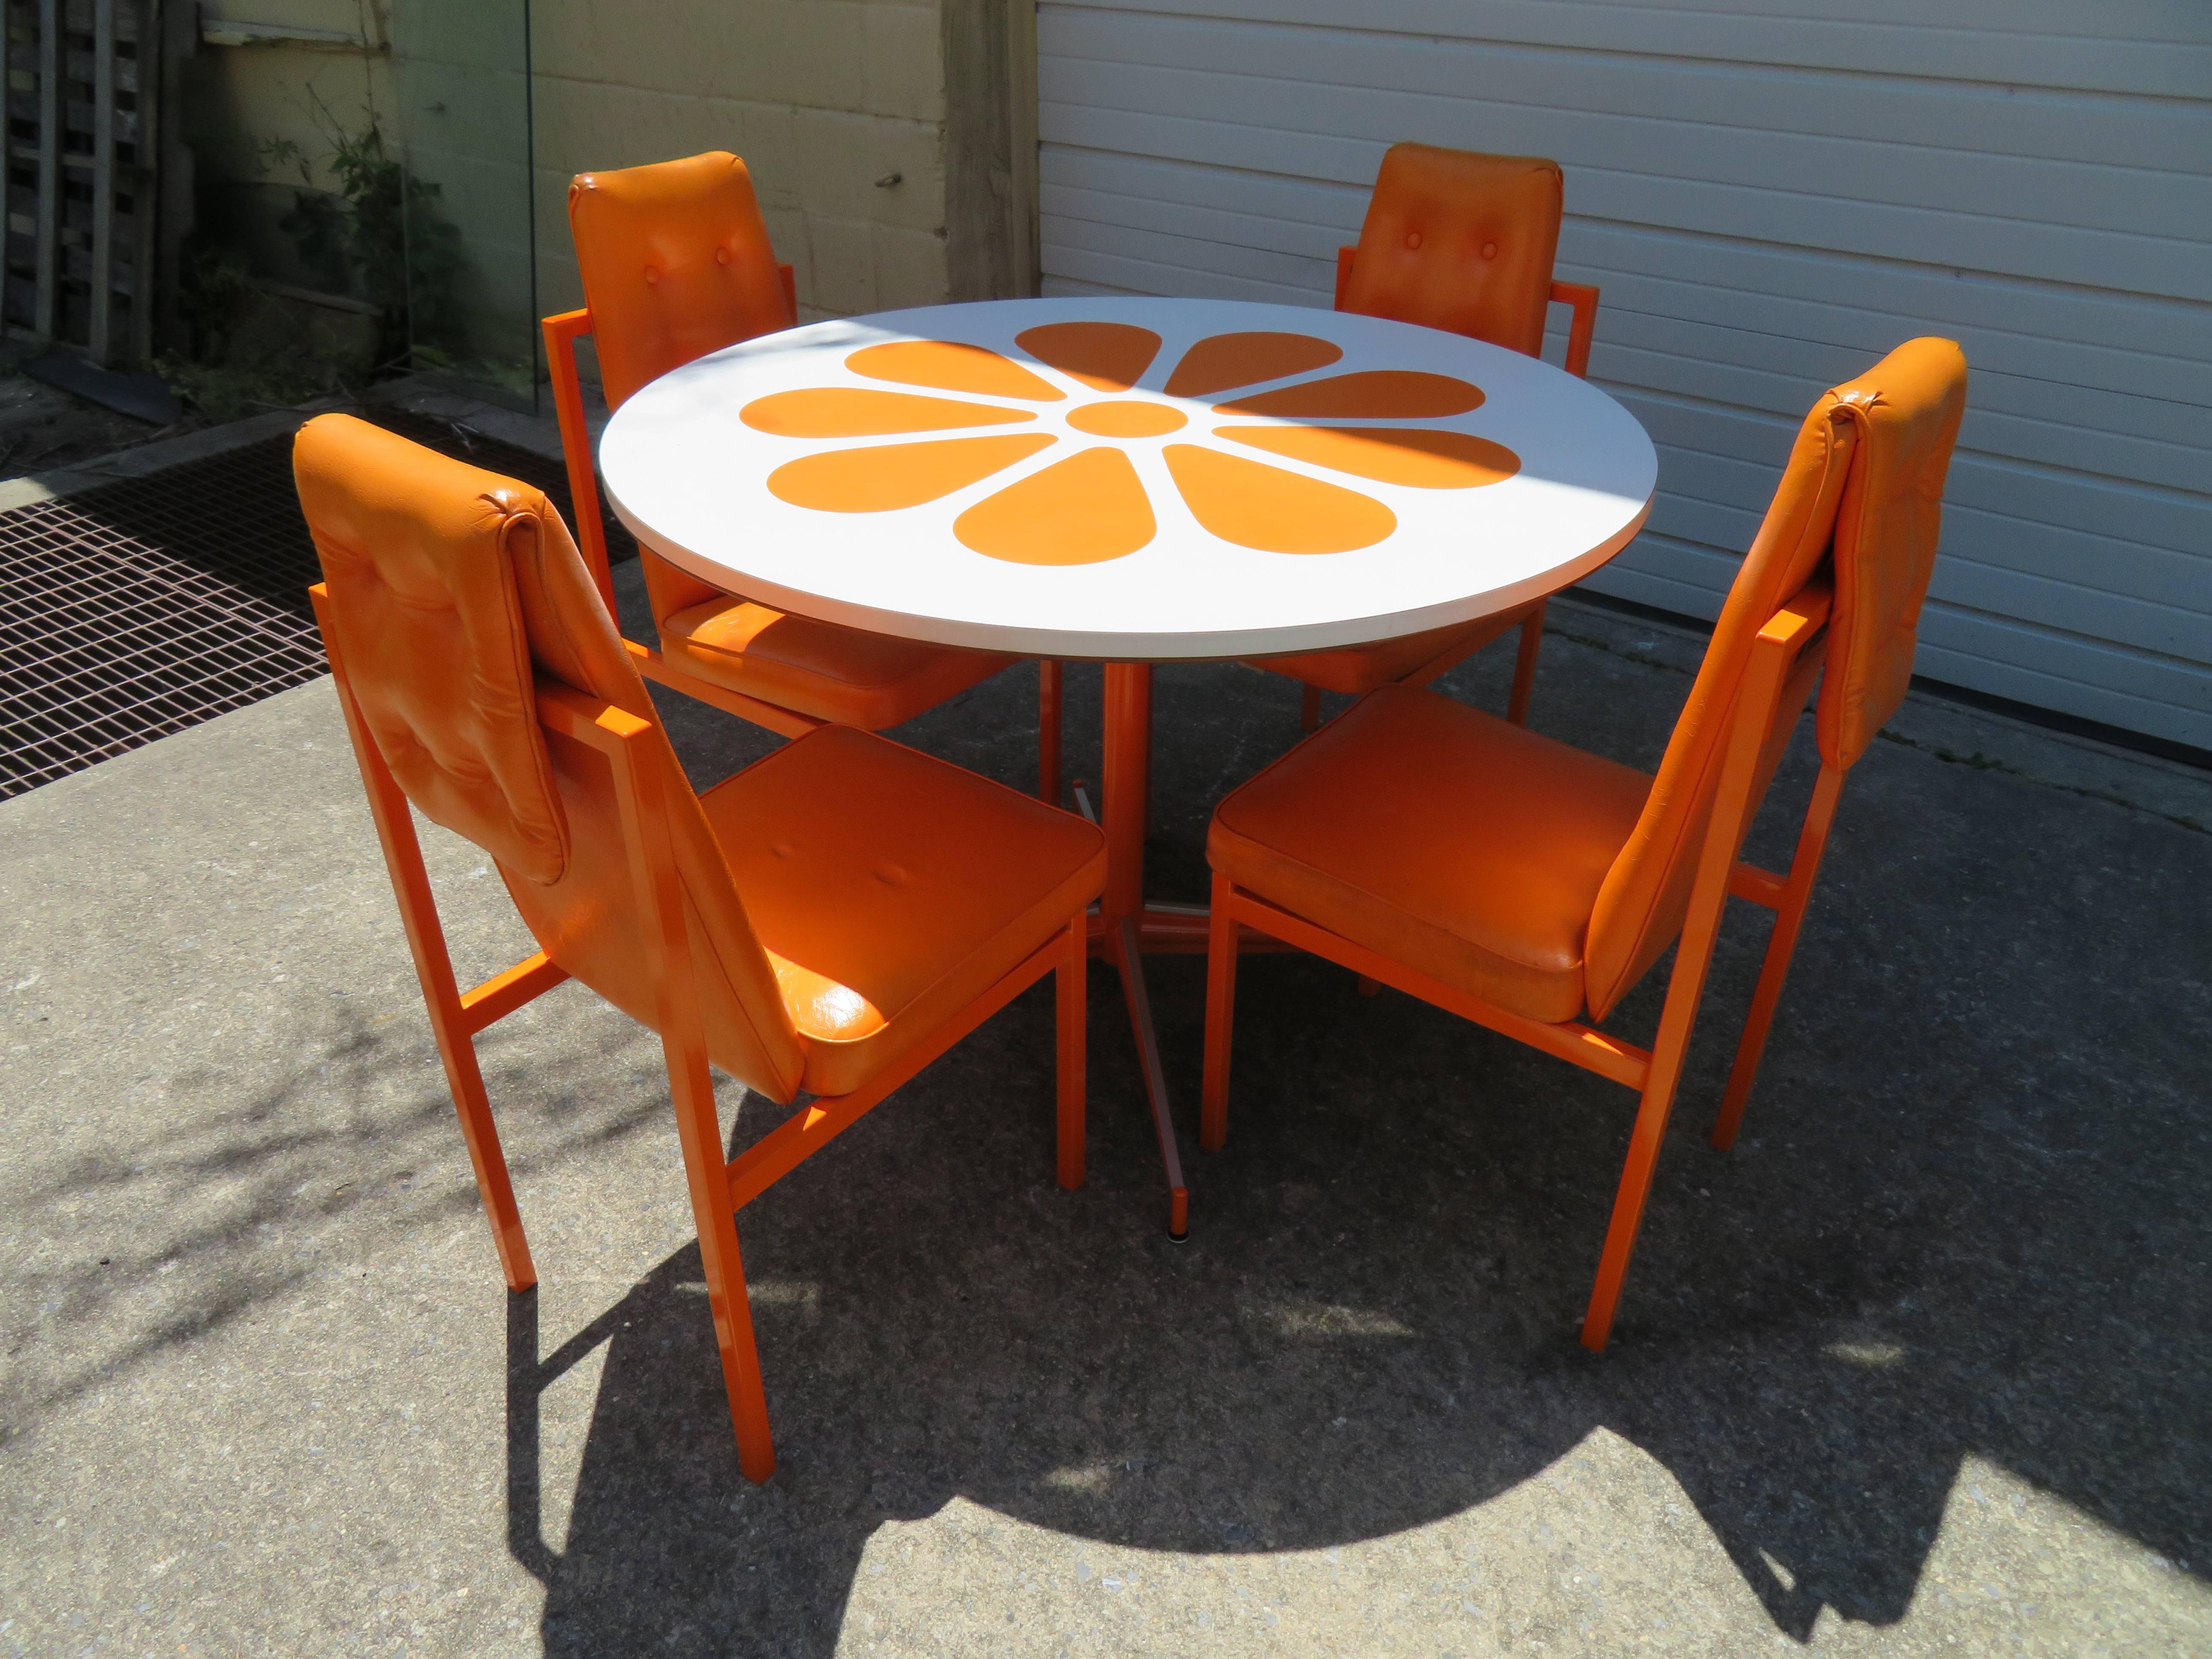 Painted Fun Orange Slice 1960s Dining Table Four Chairs Probber Style Mid-Century Modern For Sale